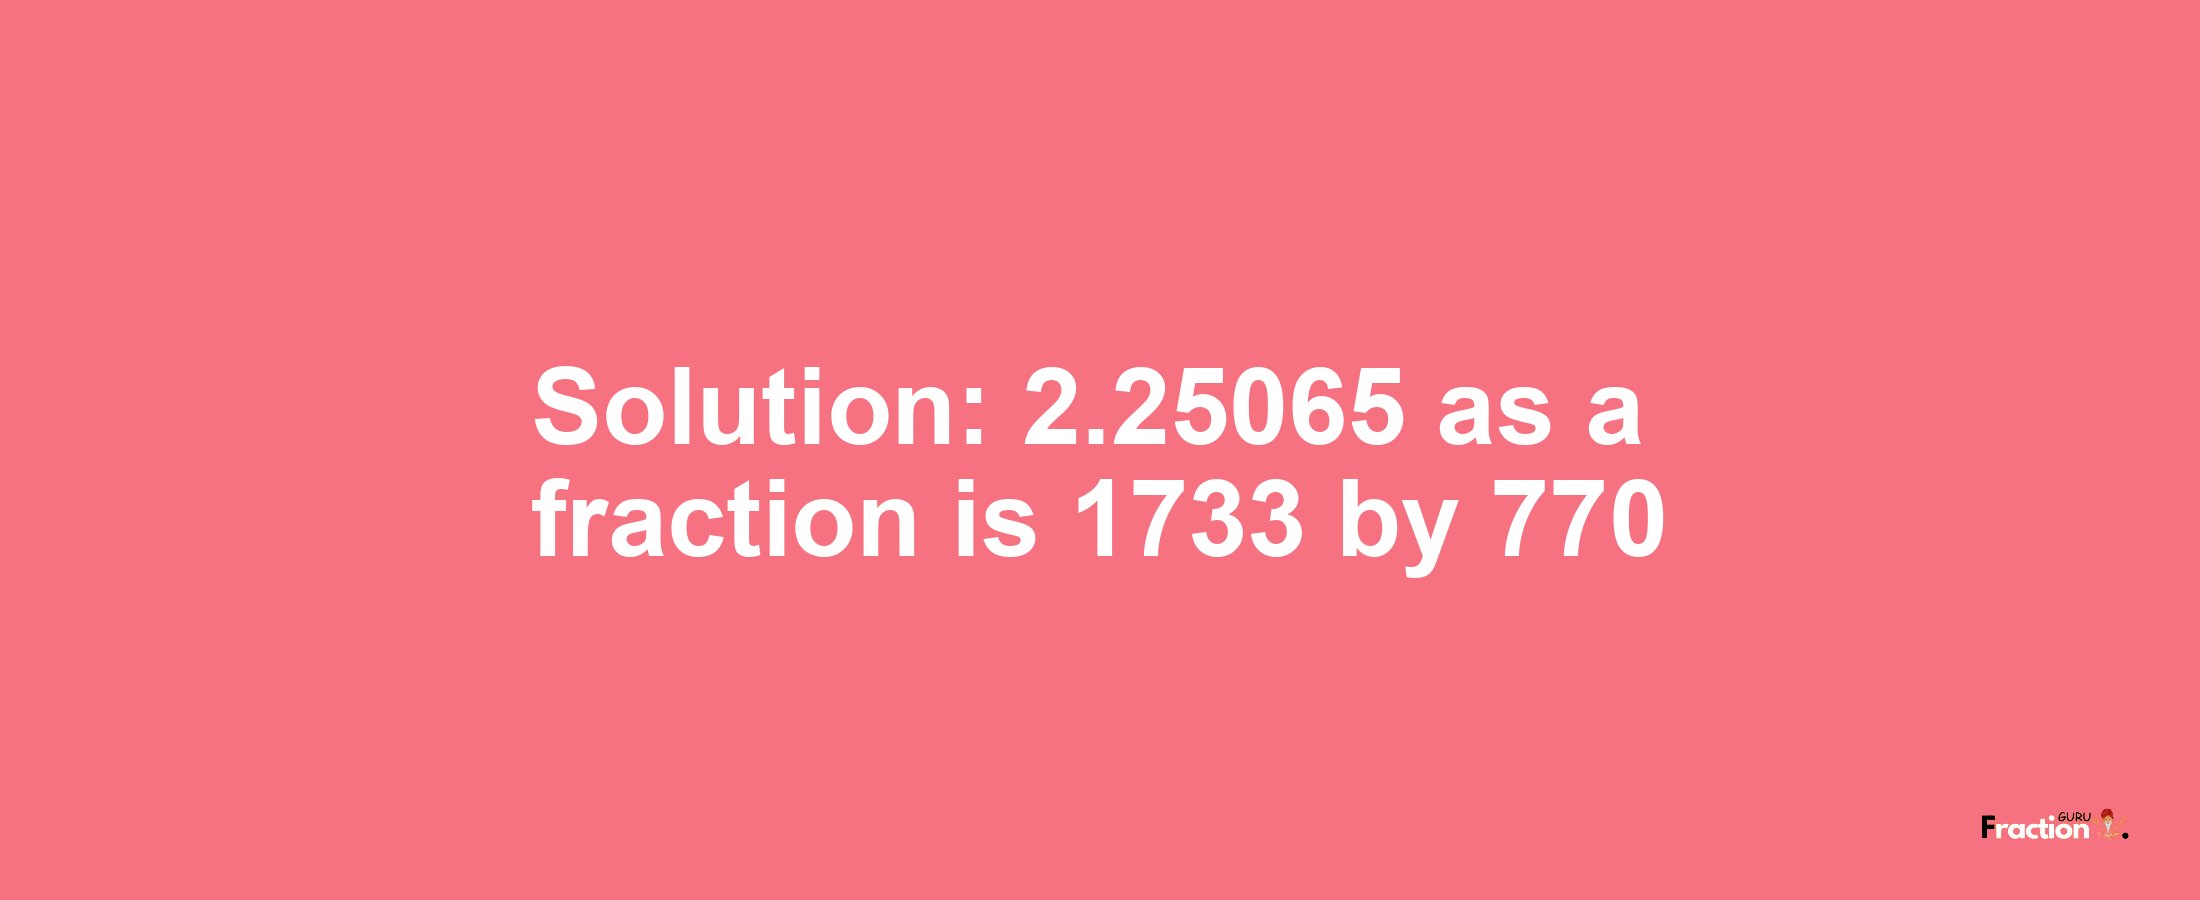 Solution:2.25065 as a fraction is 1733/770